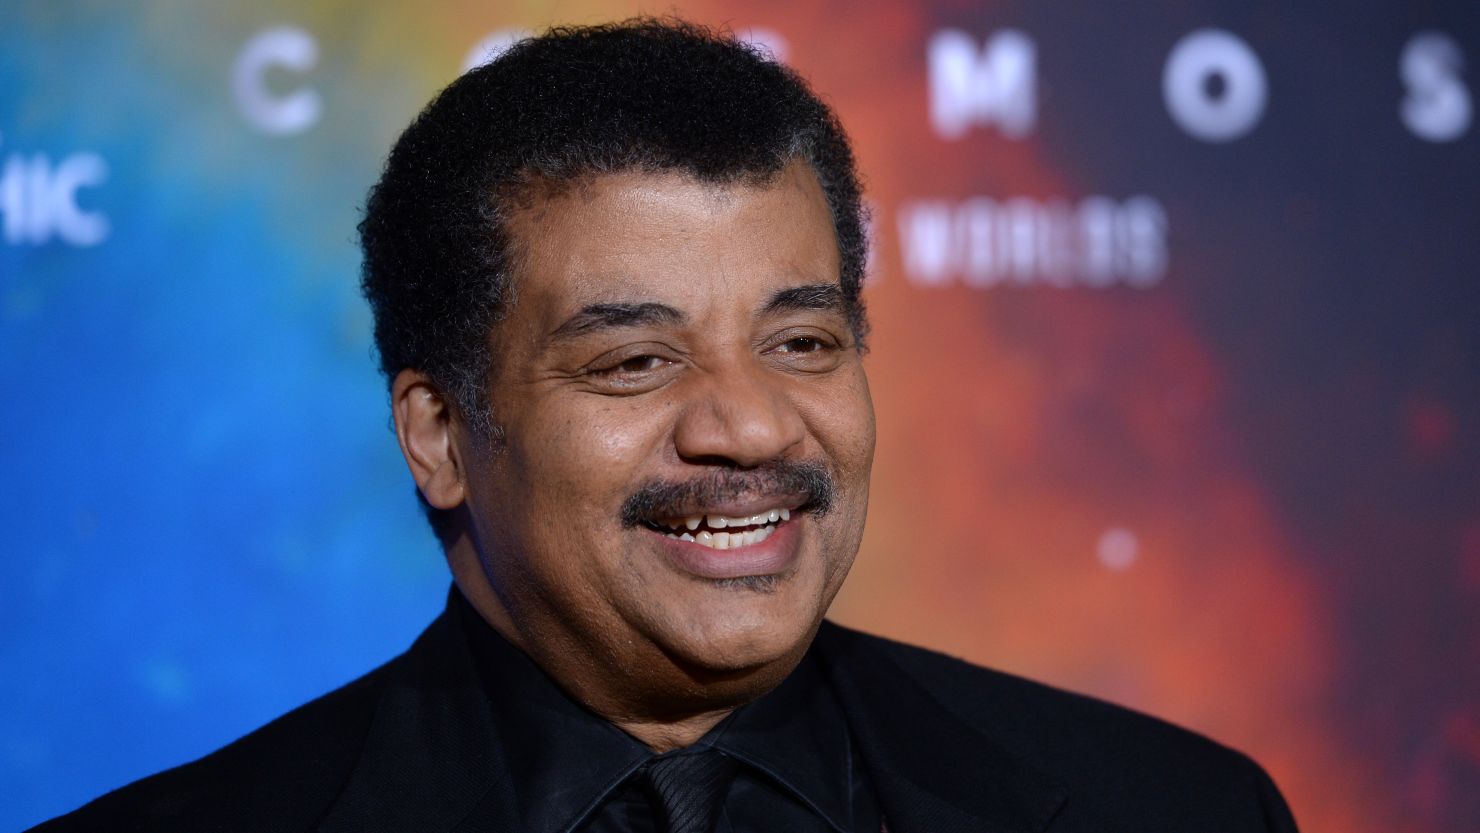 Astrophysicist Neil deGrasse Tyson is asking more questions about the universe in his new book, "Cosmic Queries."